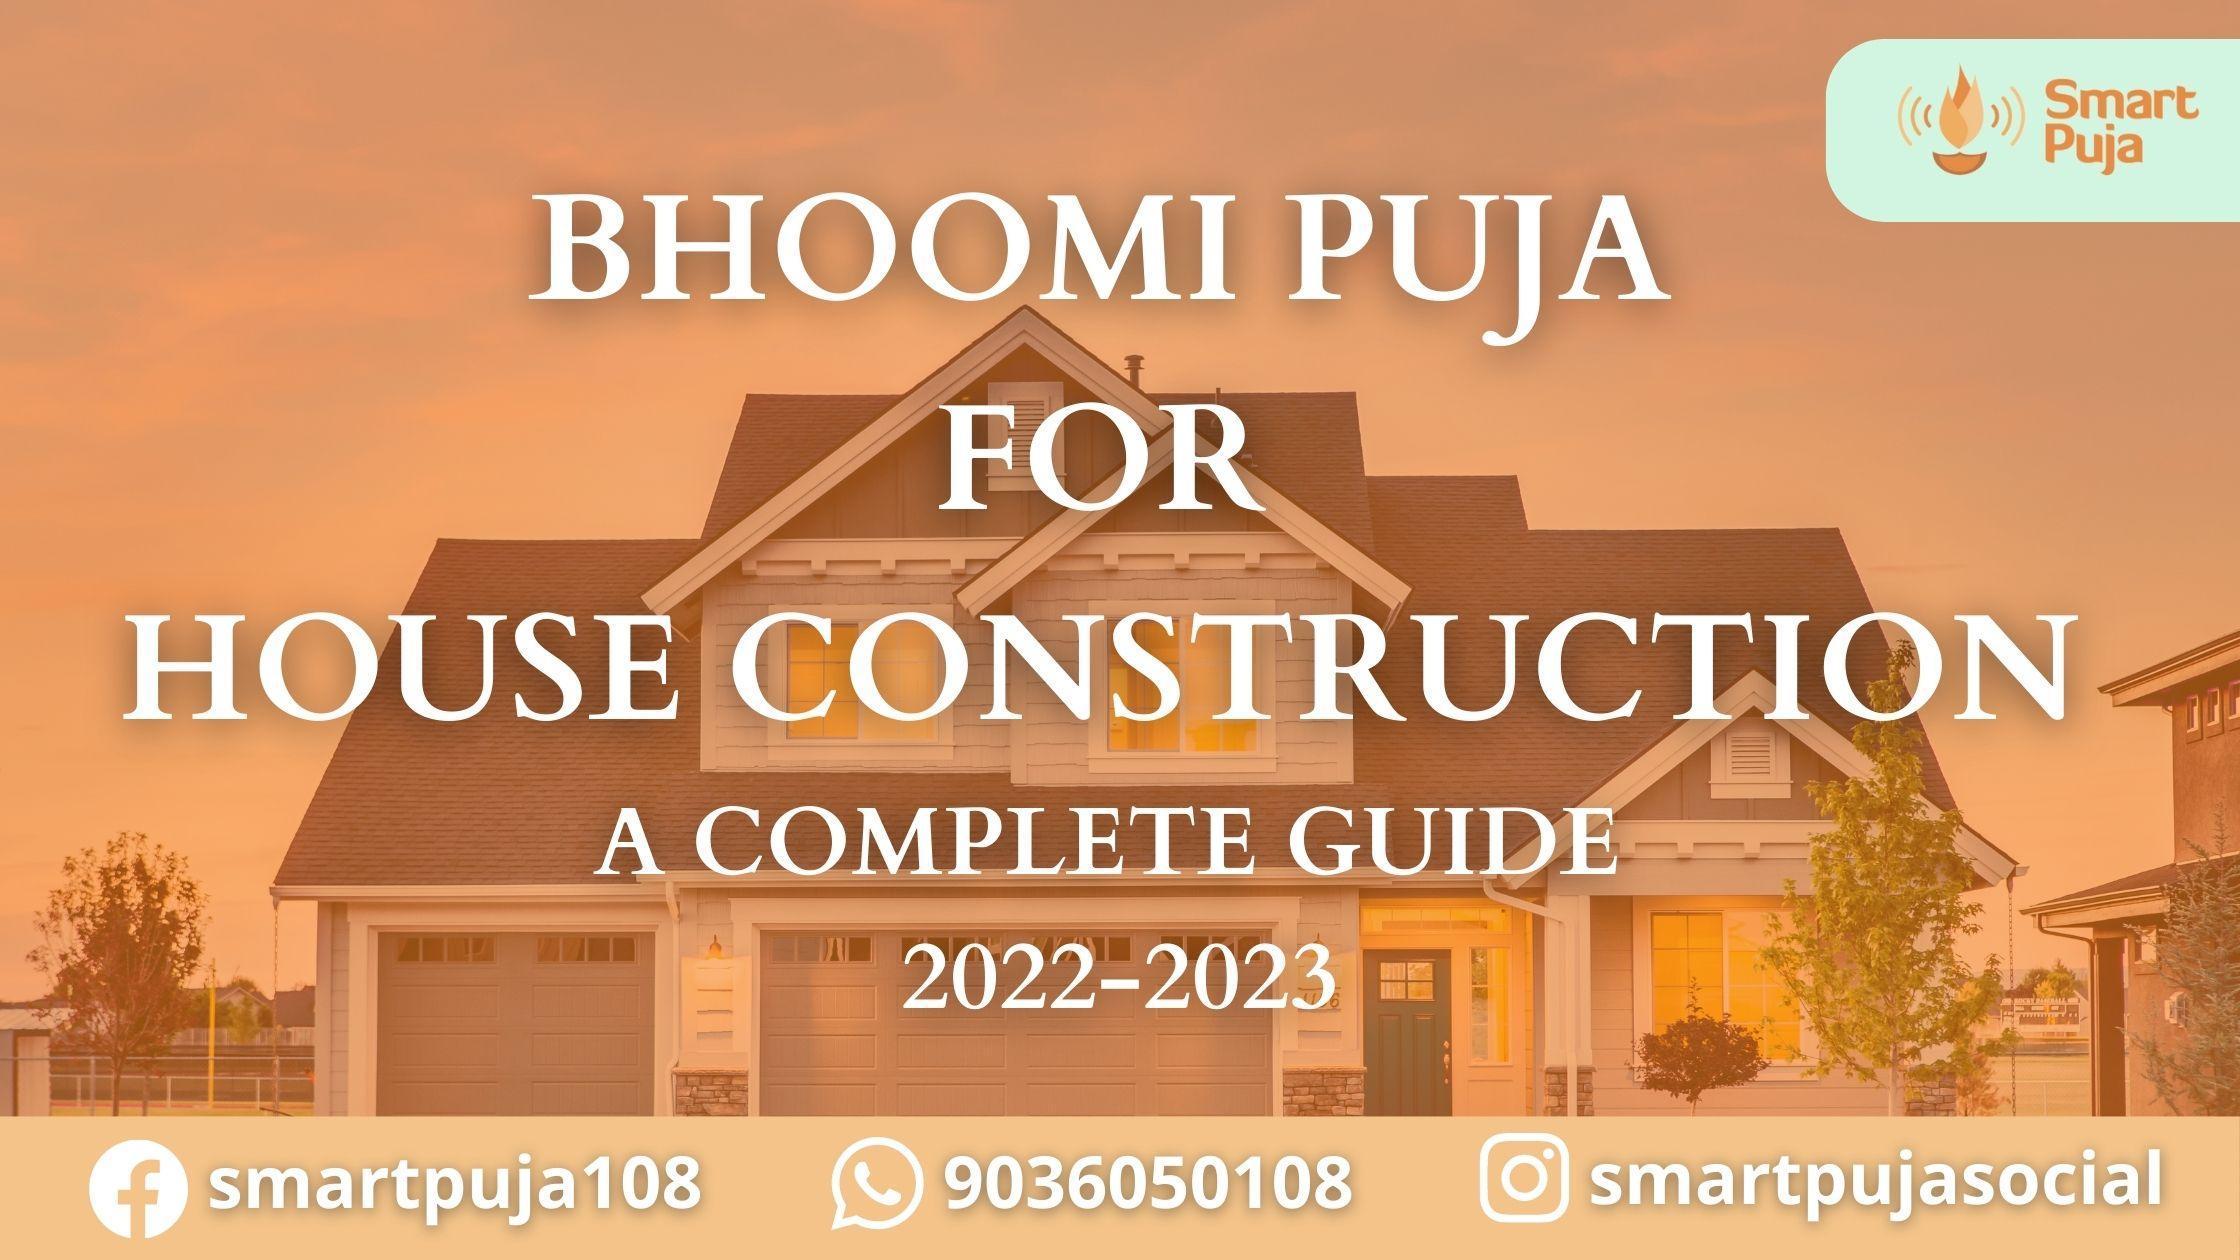 Bhoomi Puja for House Construction Guide 2022-2023